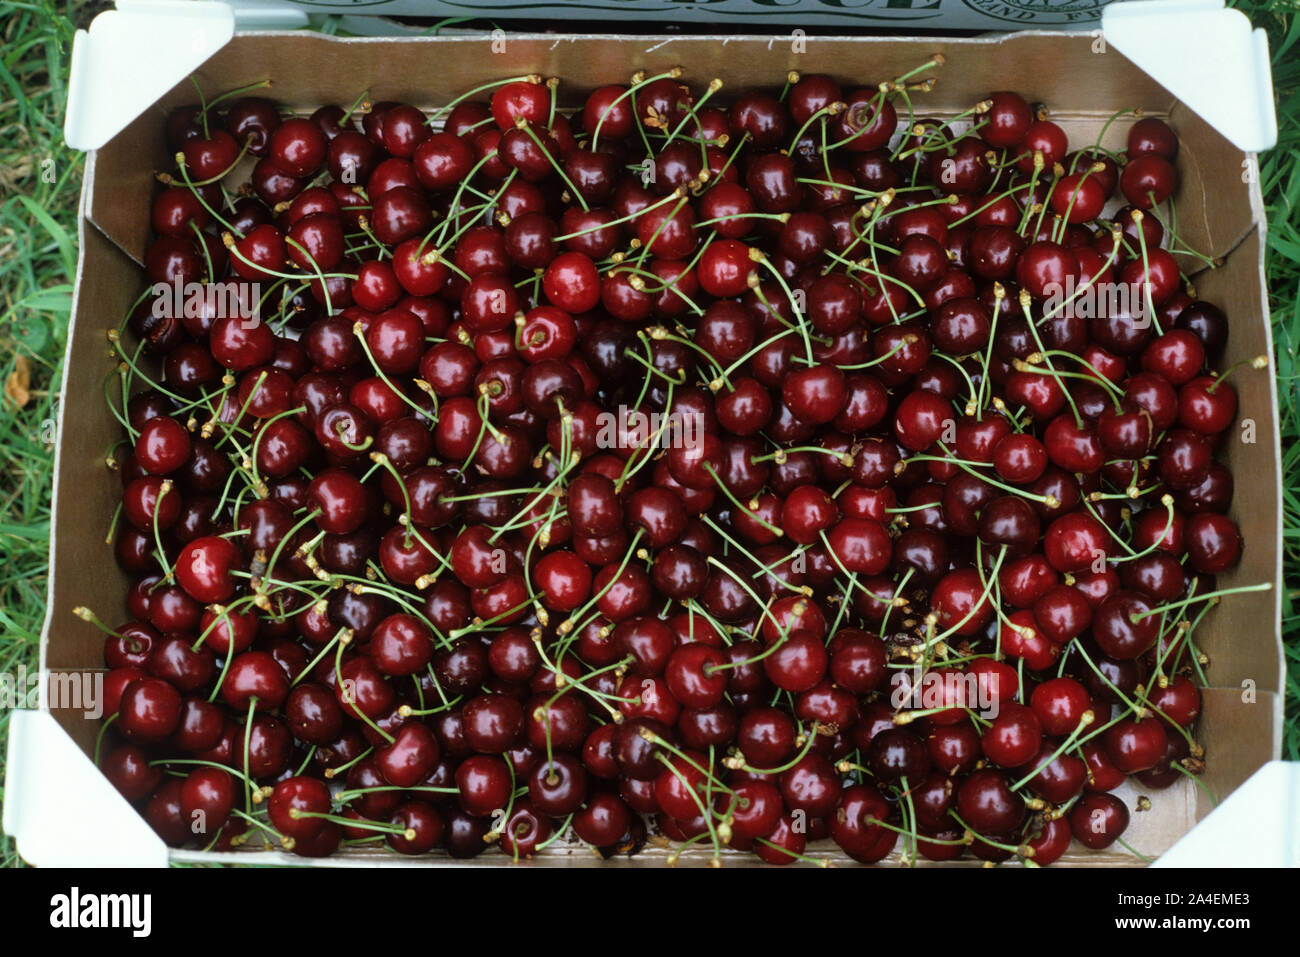 Box of freshly picked dark red cherries, variety Early Rivers, from an English Oxfordshire orchard Stock Photo